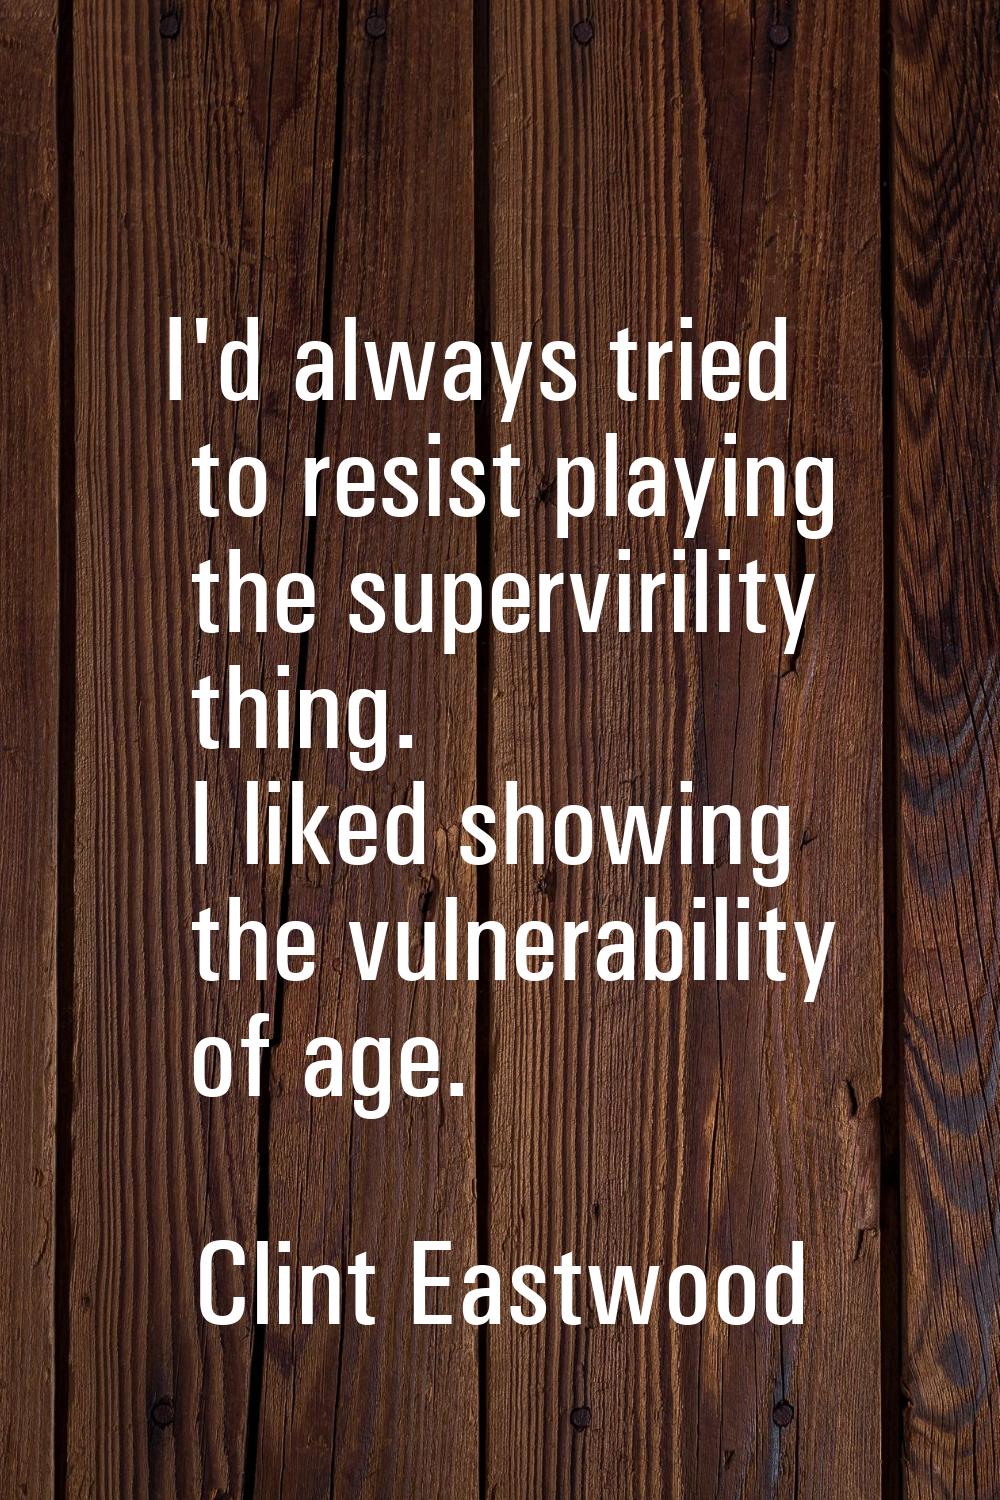 I'd always tried to resist playing the supervirility thing. I liked showing the vulnerability of ag